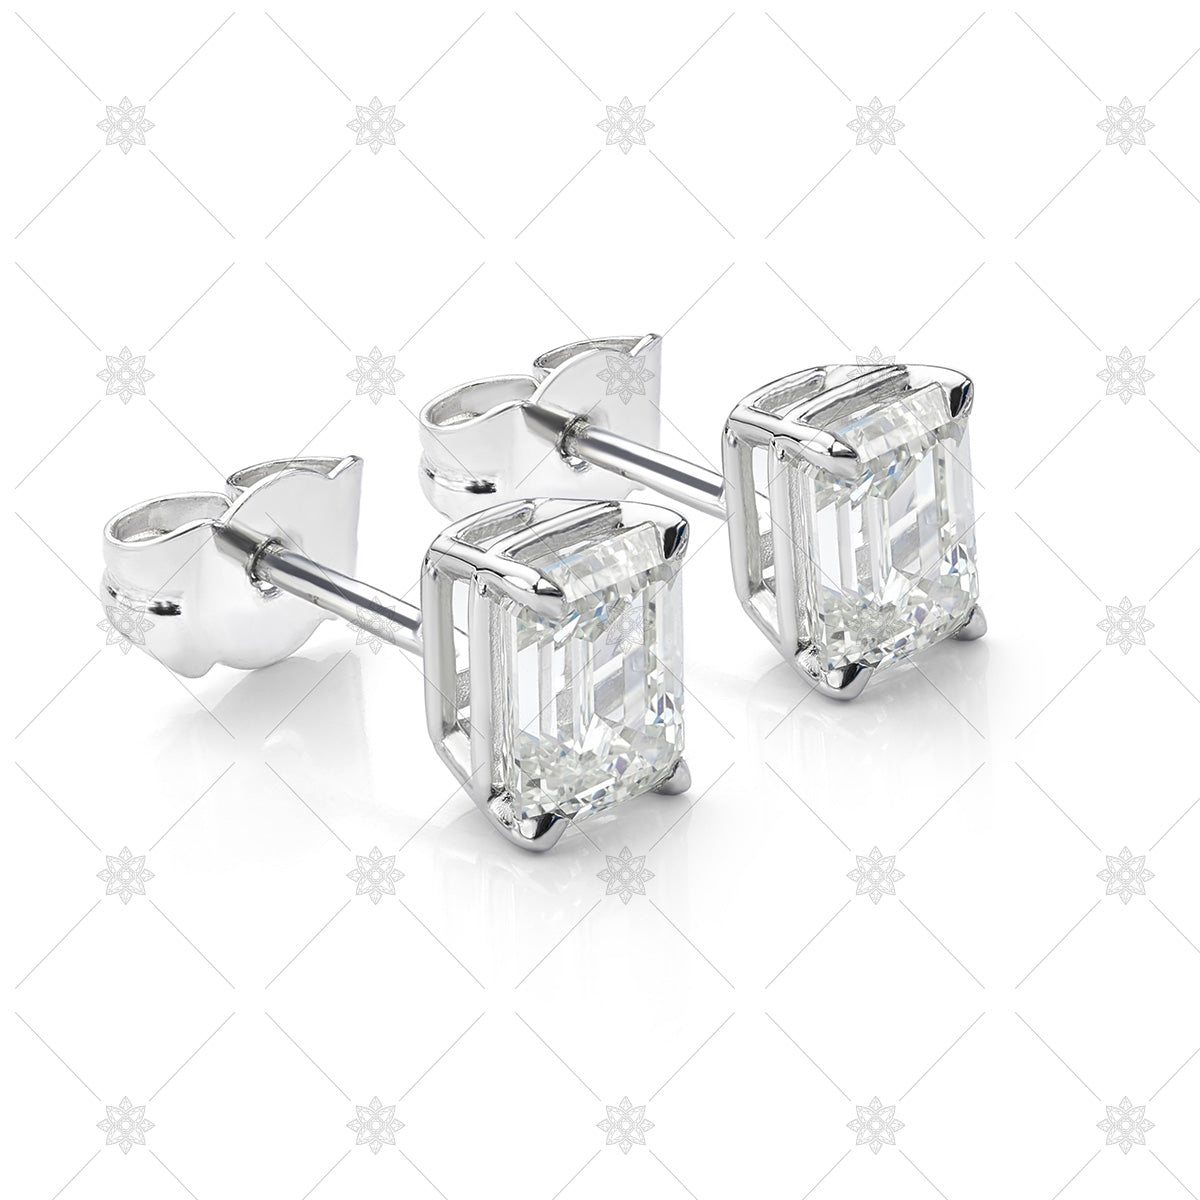 14k White gold earrings with 2 emerald cut, 8 round bril… | Drouot.com